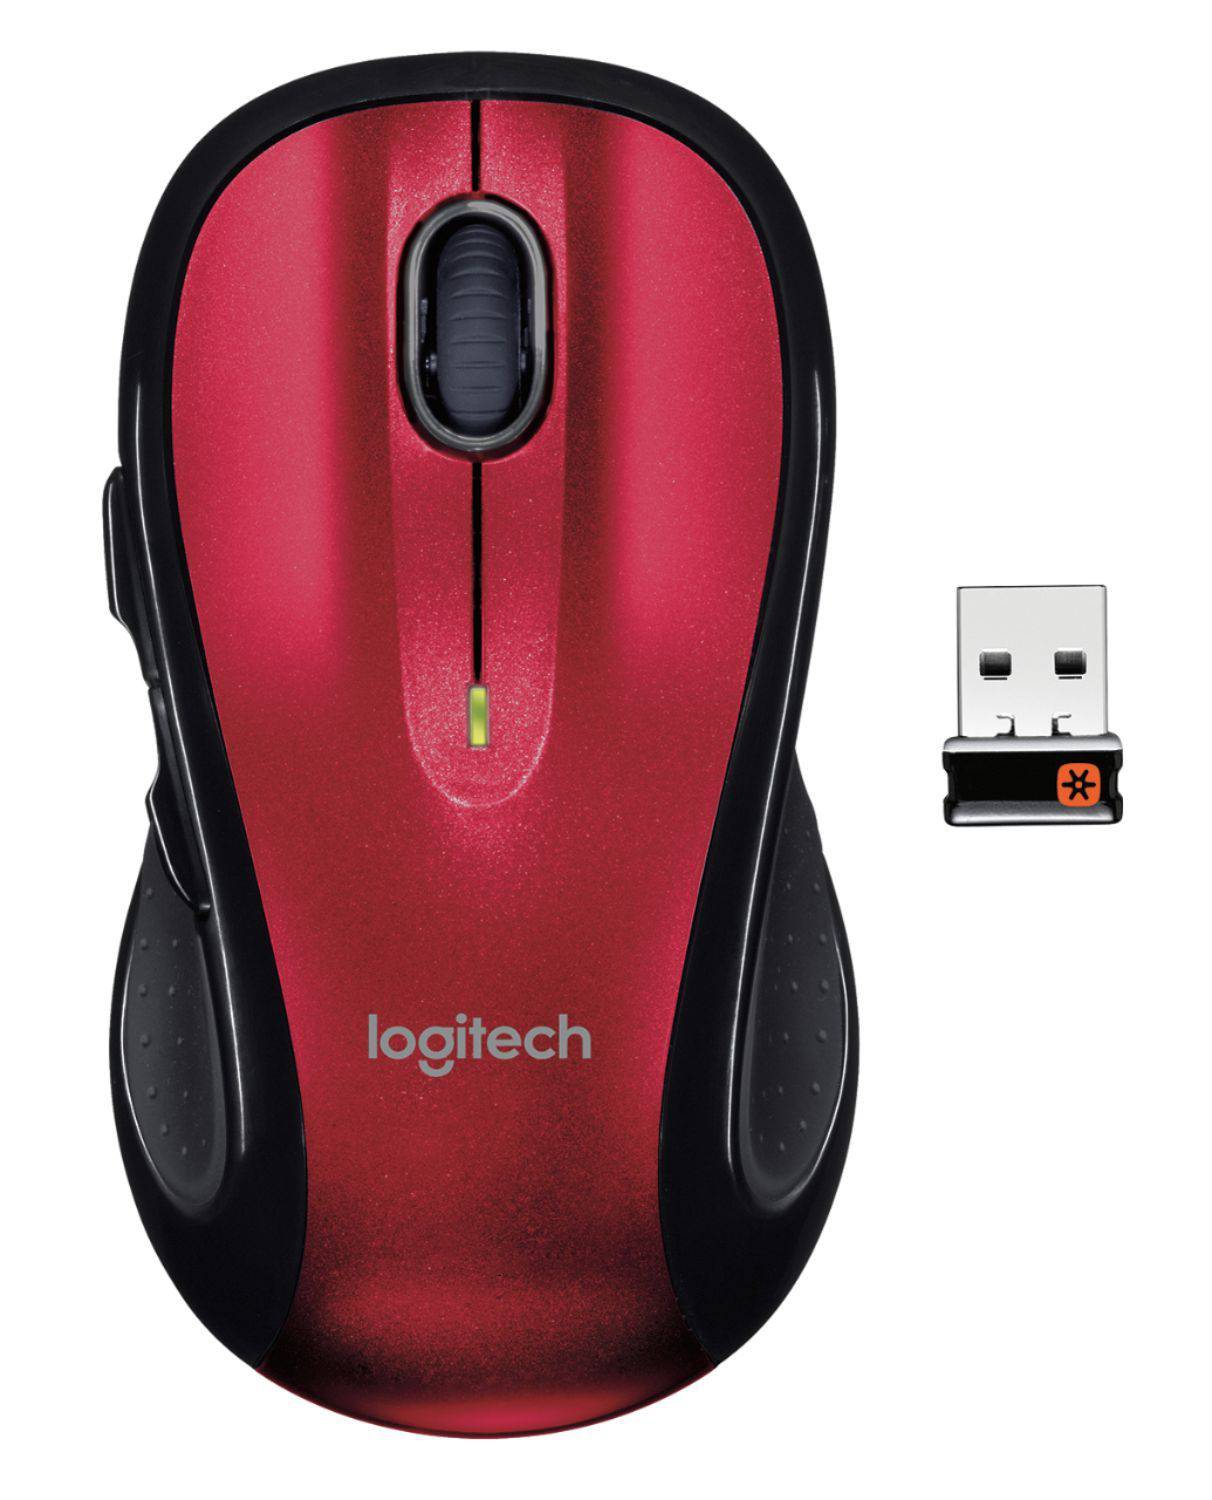 Mouse Logitech M510 Wireless Lazer Red - Albagame